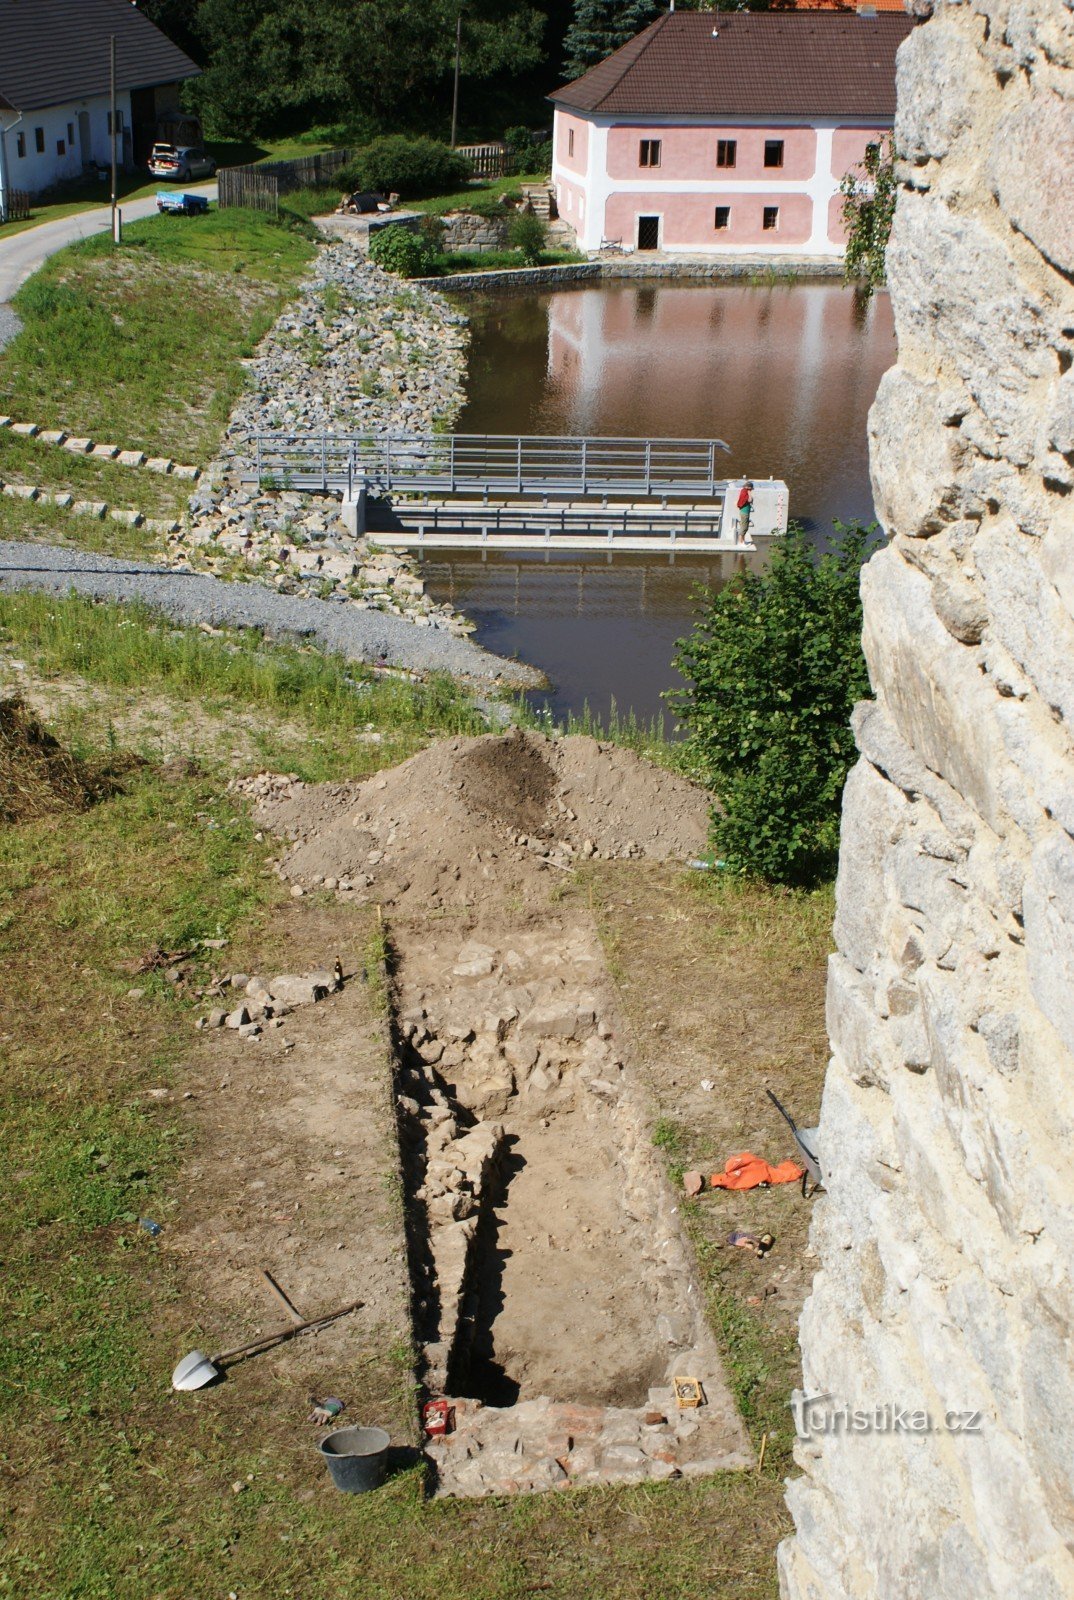 view from the tower on archaeological works and Hláska pond